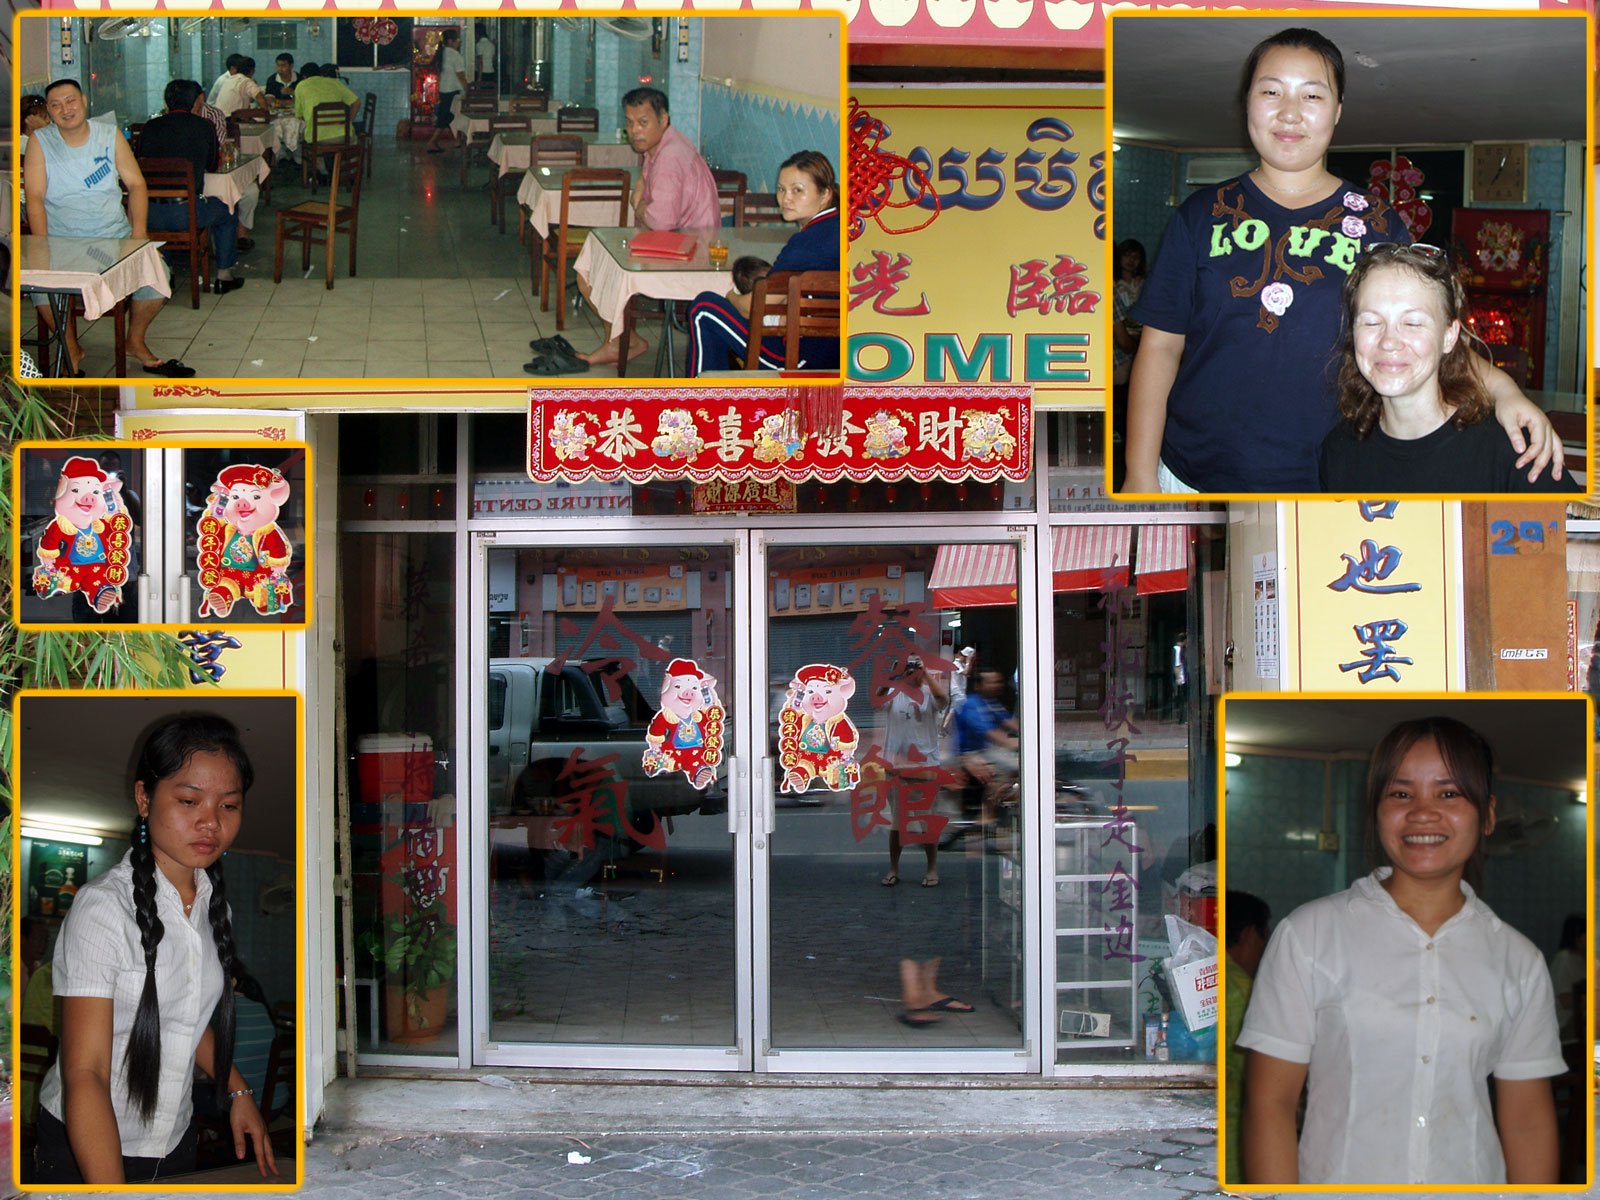 [The+Chinese+restaurant+we+used+almost+every+day.jpg]